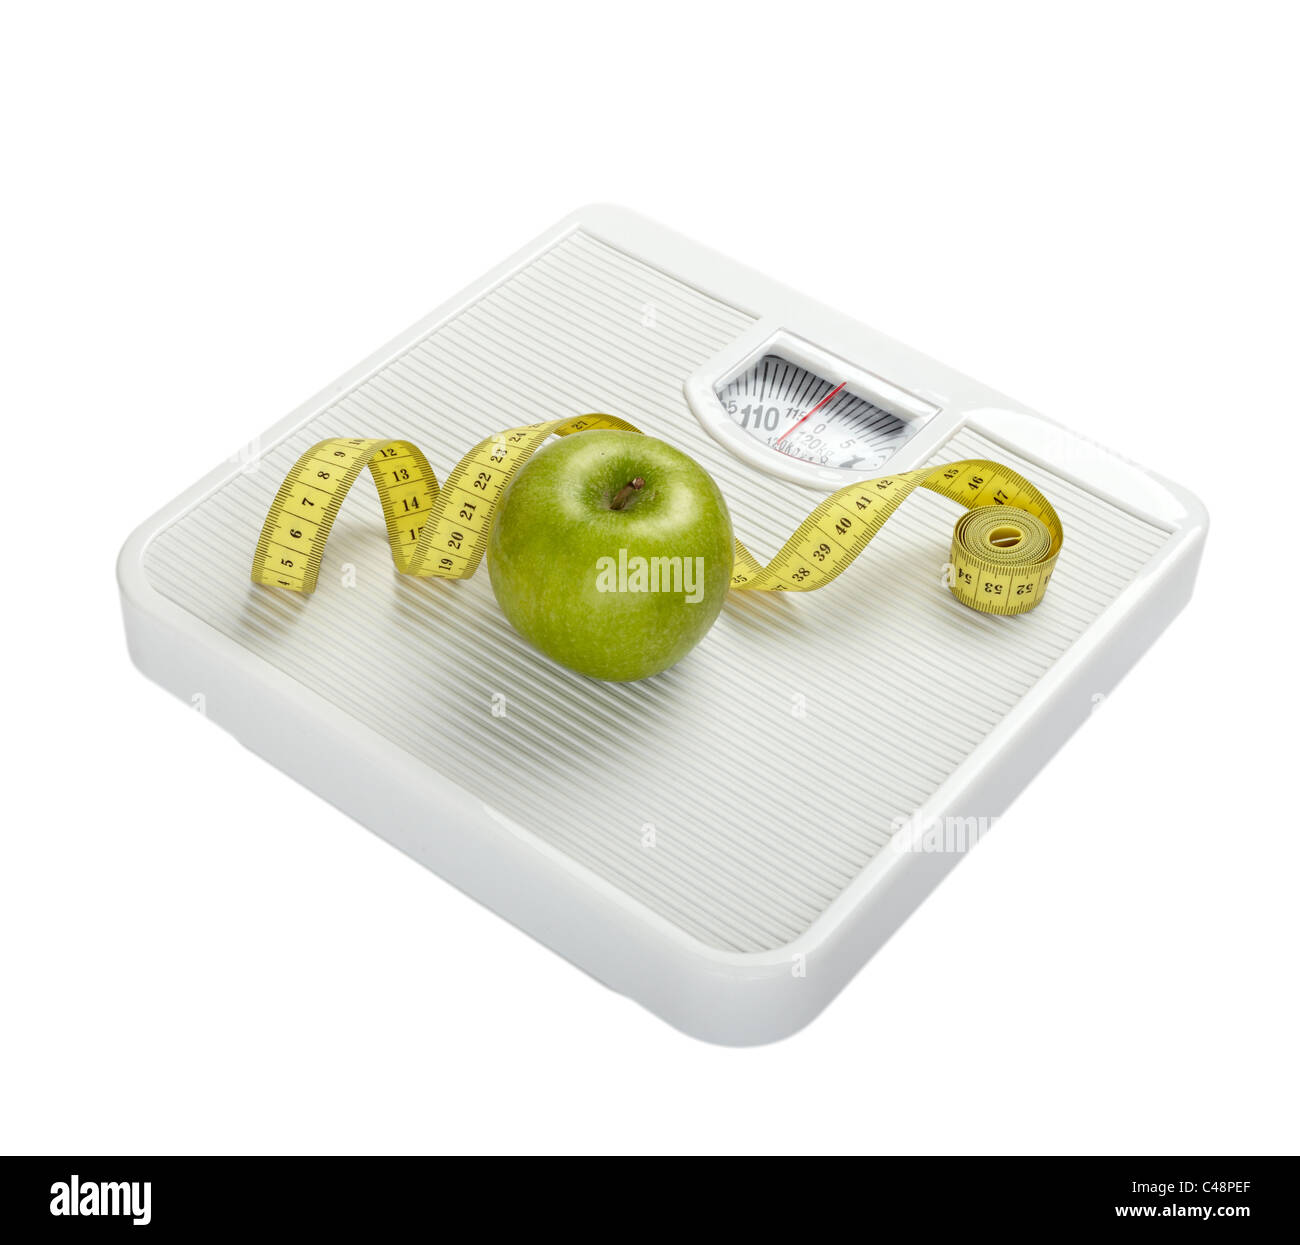 Apple scales scale overweight obesity food health weighing scale